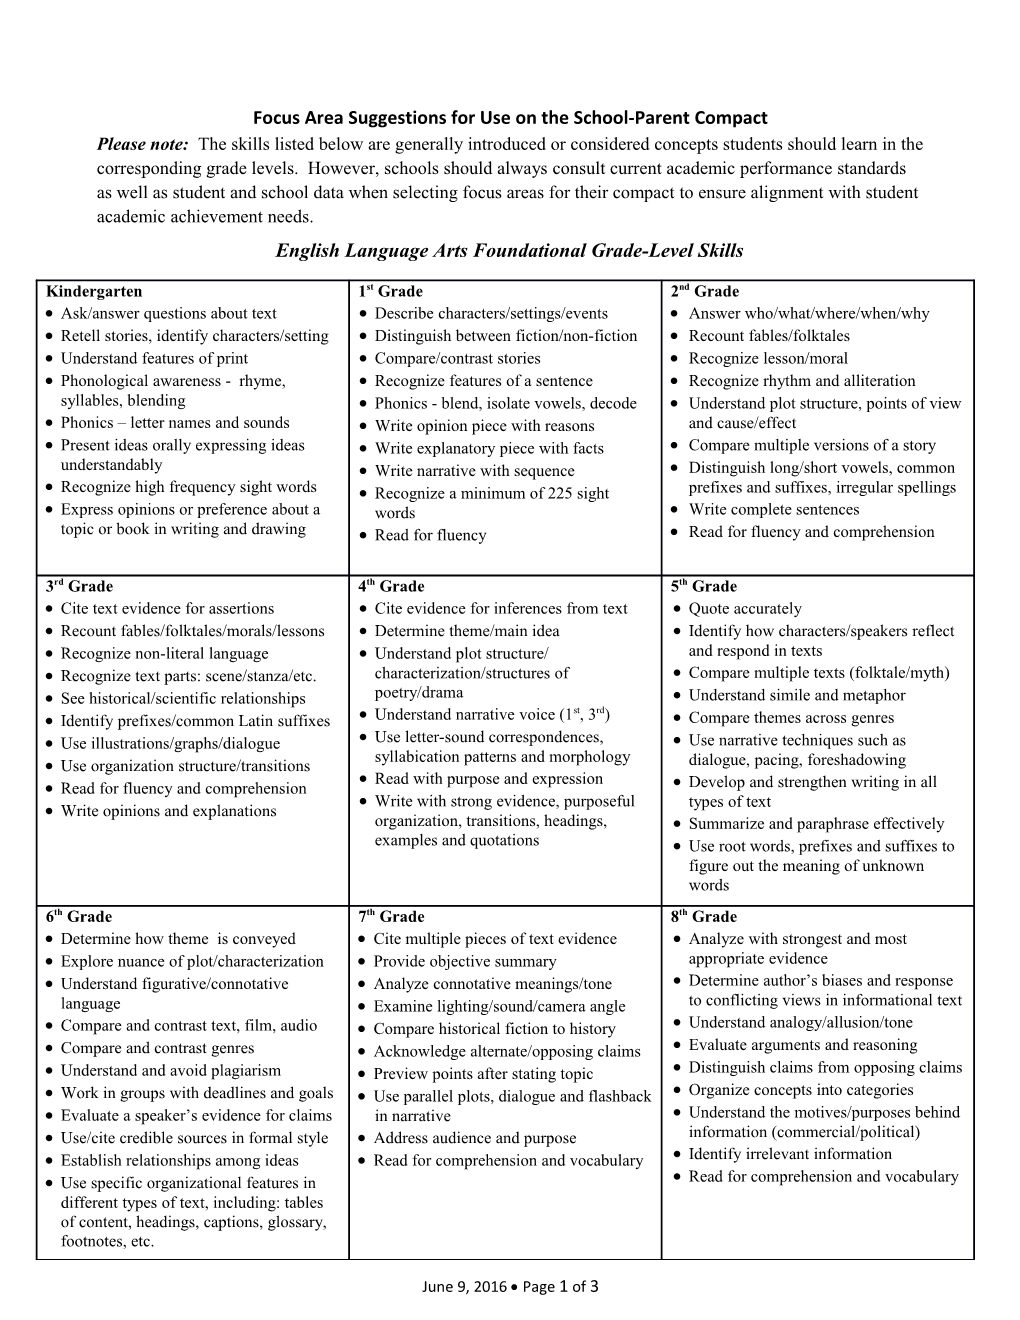 Focus Area Suggestions for Use on the School-Parent Compact